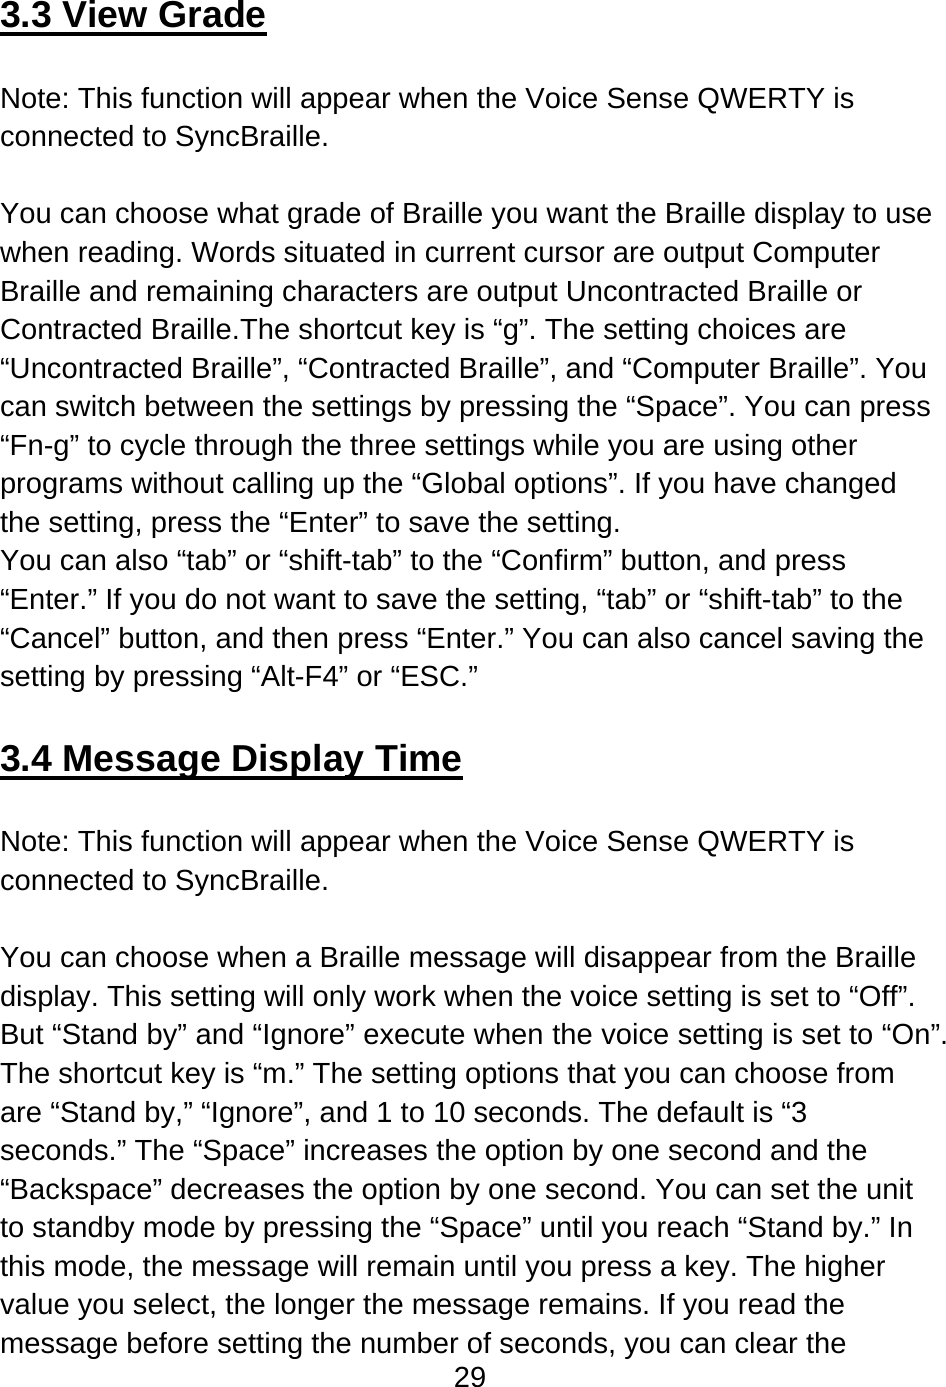 29   3.3 View Grade  Note: This function will appear when the Voice Sense QWERTY is connected to SyncBraille.  You can choose what grade of Braille you want the Braille display to use when reading. Words situated in current cursor are output Computer Braille and remaining characters are output Uncontracted Braille or Contracted Braille.The shortcut key is “g”. The setting choices are “Uncontracted Braille”, “Contracted Braille”, and “Computer Braille”. You can switch between the settings by pressing the “Space”. You can press “Fn-g” to cycle through the three settings while you are using other programs without calling up the “Global options”. If you have changed the setting, press the “Enter” to save the setting. You can also “tab” or “shift-tab” to the “Confirm” button, and press “Enter.” If you do not want to save the setting, “tab” or “shift-tab” to the “Cancel” button, and then press “Enter.” You can also cancel saving the setting by pressing “Alt-F4” or “ESC.”  3.4 Message Display Time  Note: This function will appear when the Voice Sense QWERTY is connected to SyncBraille.  You can choose when a Braille message will disappear from the Braille display. This setting will only work when the voice setting is set to “Off”. But “Stand by” and “Ignore” execute when the voice setting is set to “On”.   The shortcut key is “m.” The setting options that you can choose from are “Stand by,” “Ignore”, and 1 to 10 seconds. The default is “3 seconds.” The “Space” increases the option by one second and the “Backspace” decreases the option by one second. You can set the unit to standby mode by pressing the “Space” until you reach “Stand by.” In this mode, the message will remain until you press a key. The higher value you select, the longer the message remains. If you read the message before setting the number of seconds, you can clear the 